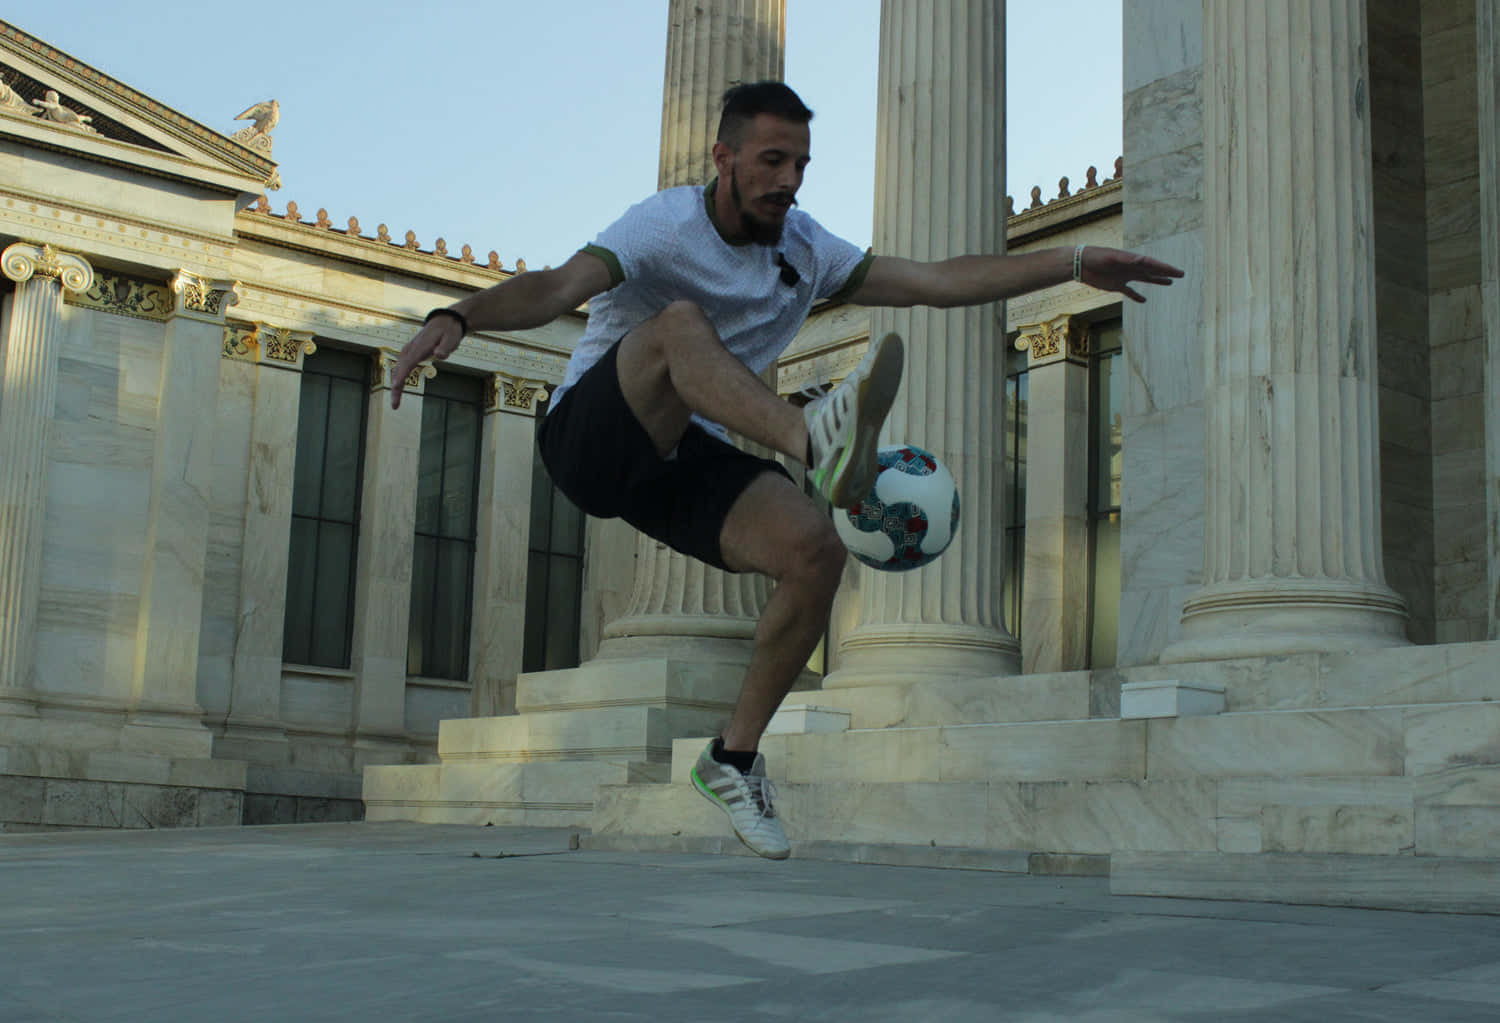 Freestyle Soccer Trickin Frontof Classic Architecture Wallpaper